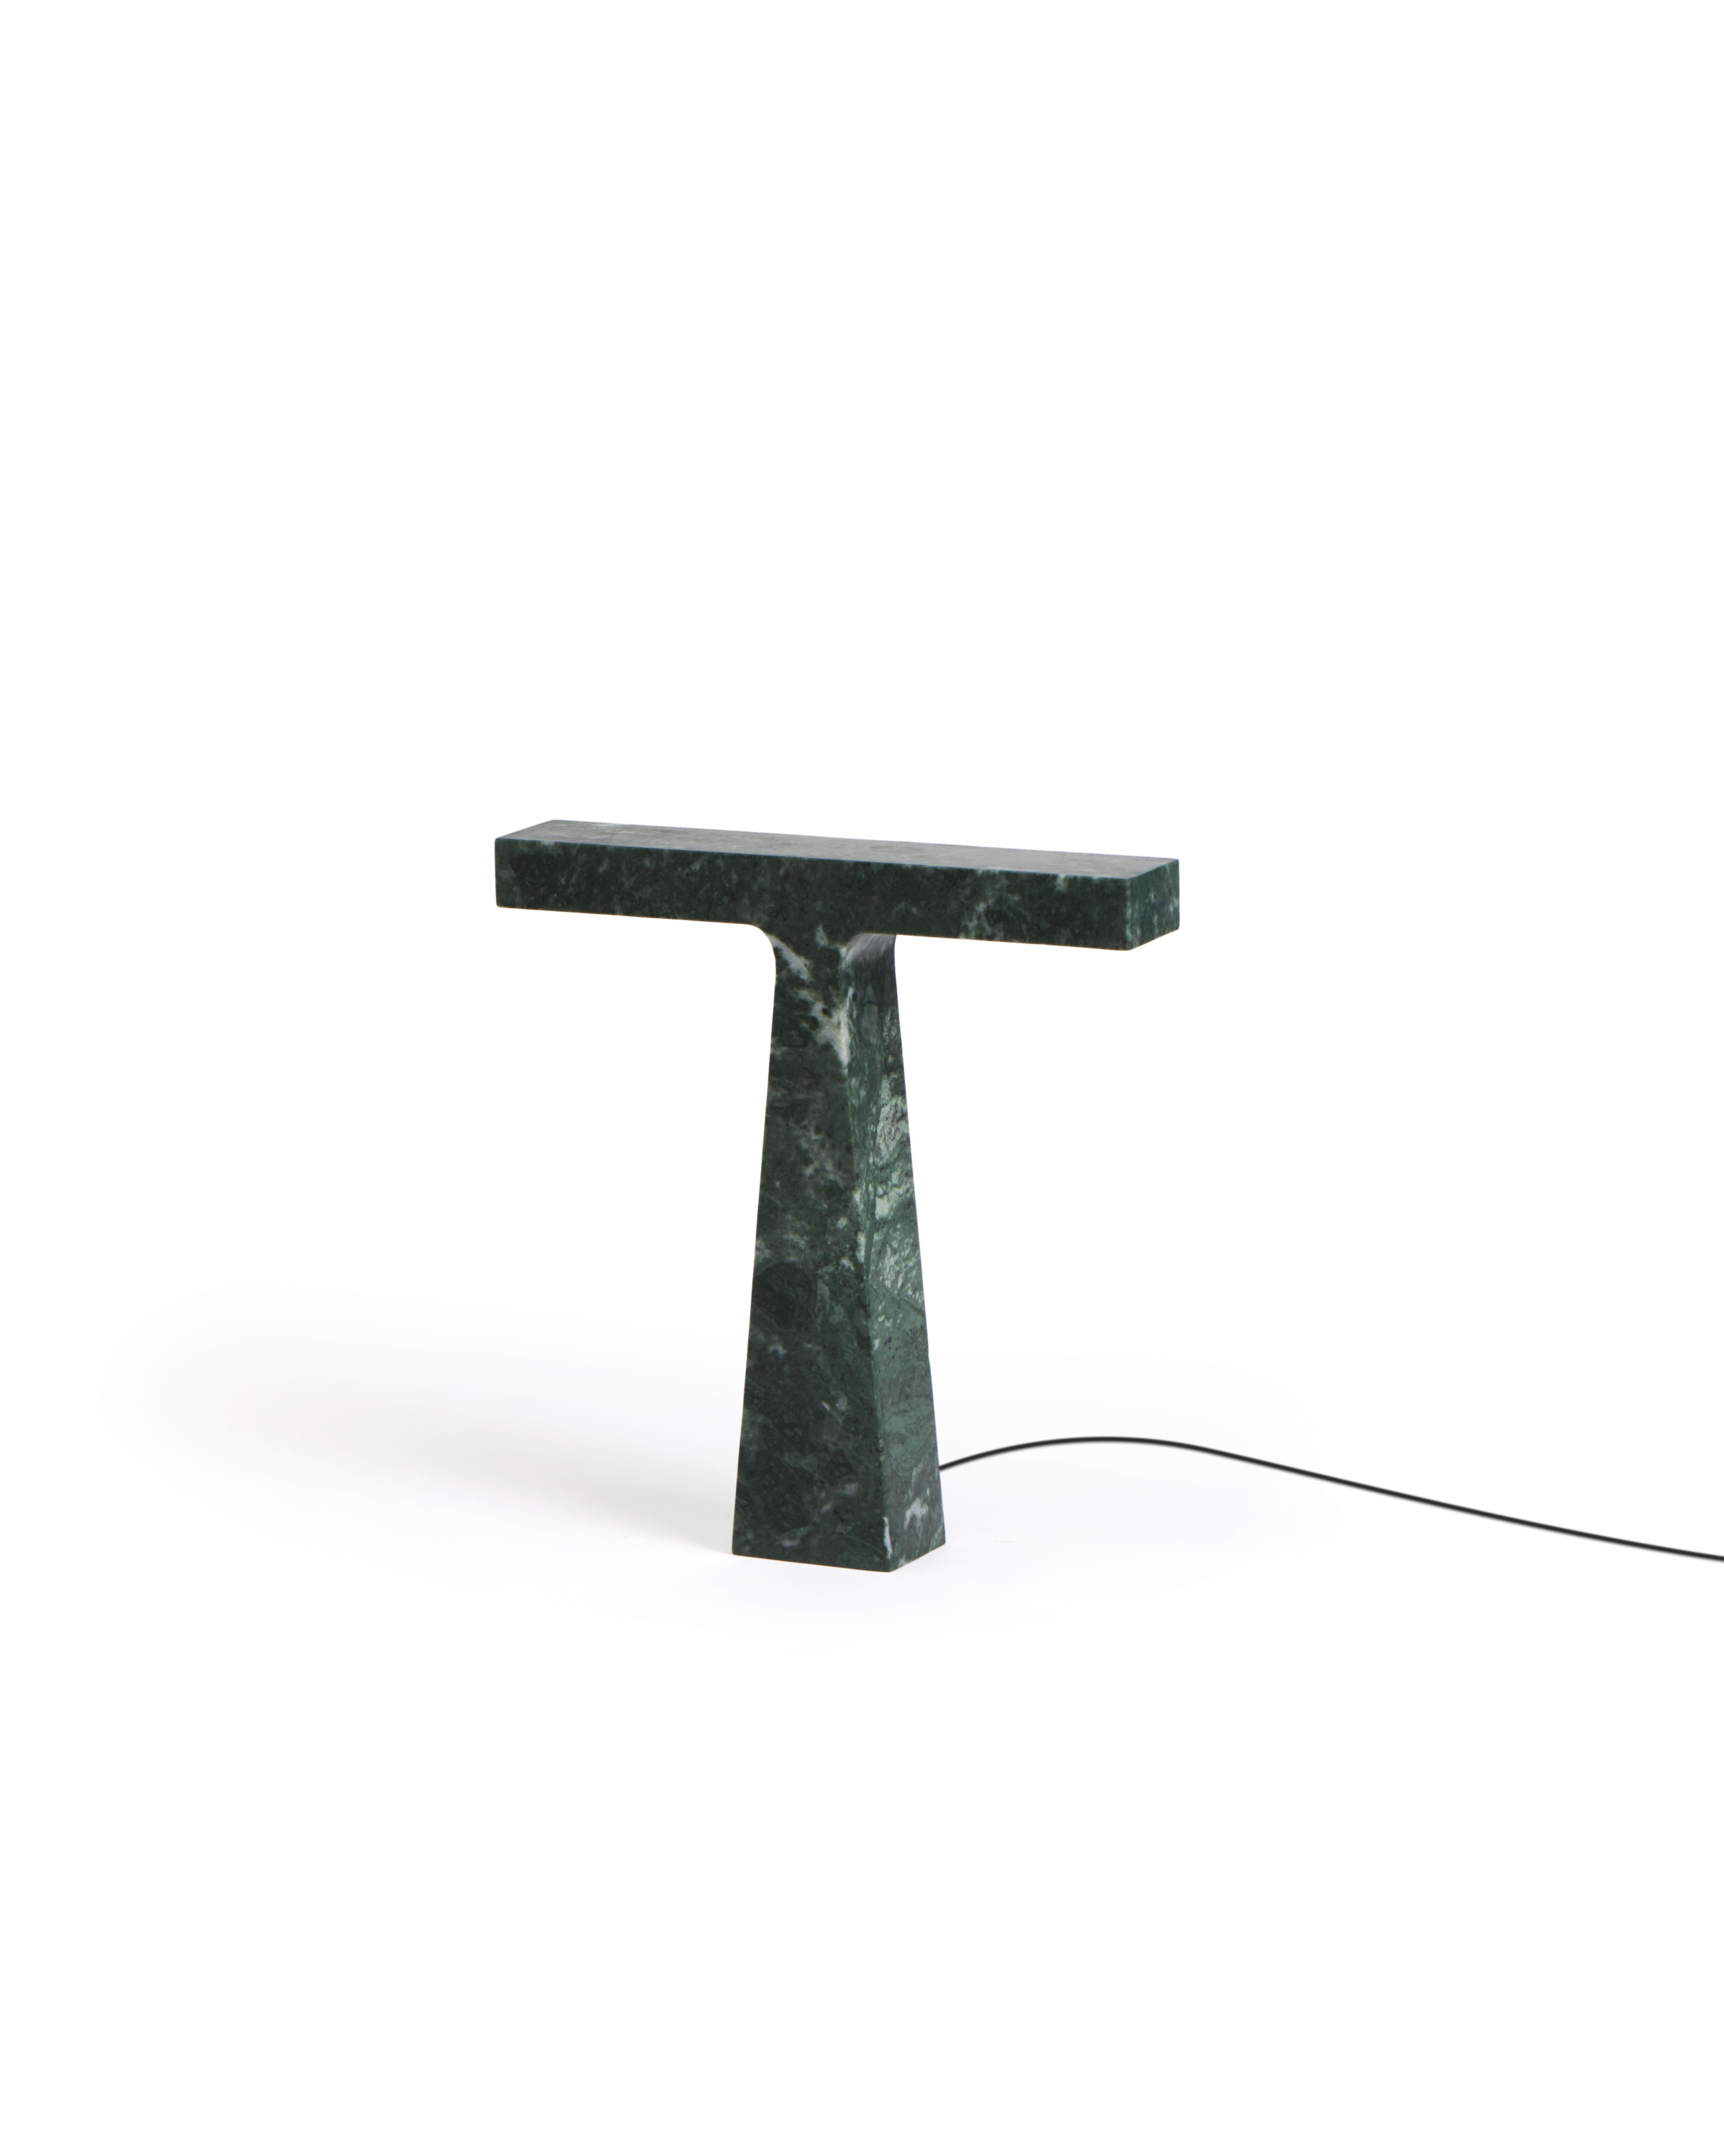 Bruchi lamp by Niko Koronis
Dimensions: W 37.5 x D 7 x H 35
Materials: Verde Guatemala

Also Available: Rosso Levanto, please contact us 

All our lamps can be wired according to each country. If sold to the USA it will be wired for the USA